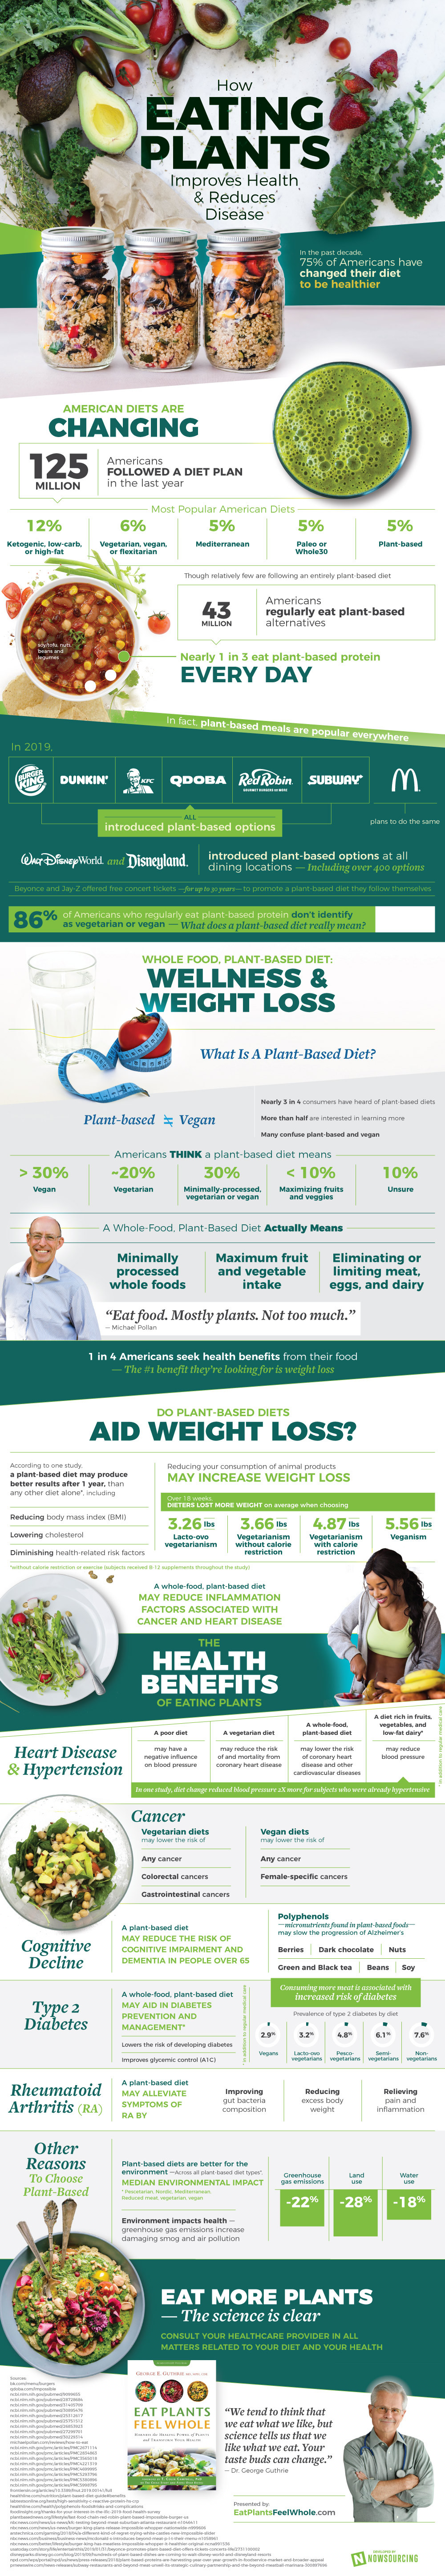 Infographic about benefits of a plant-based diet